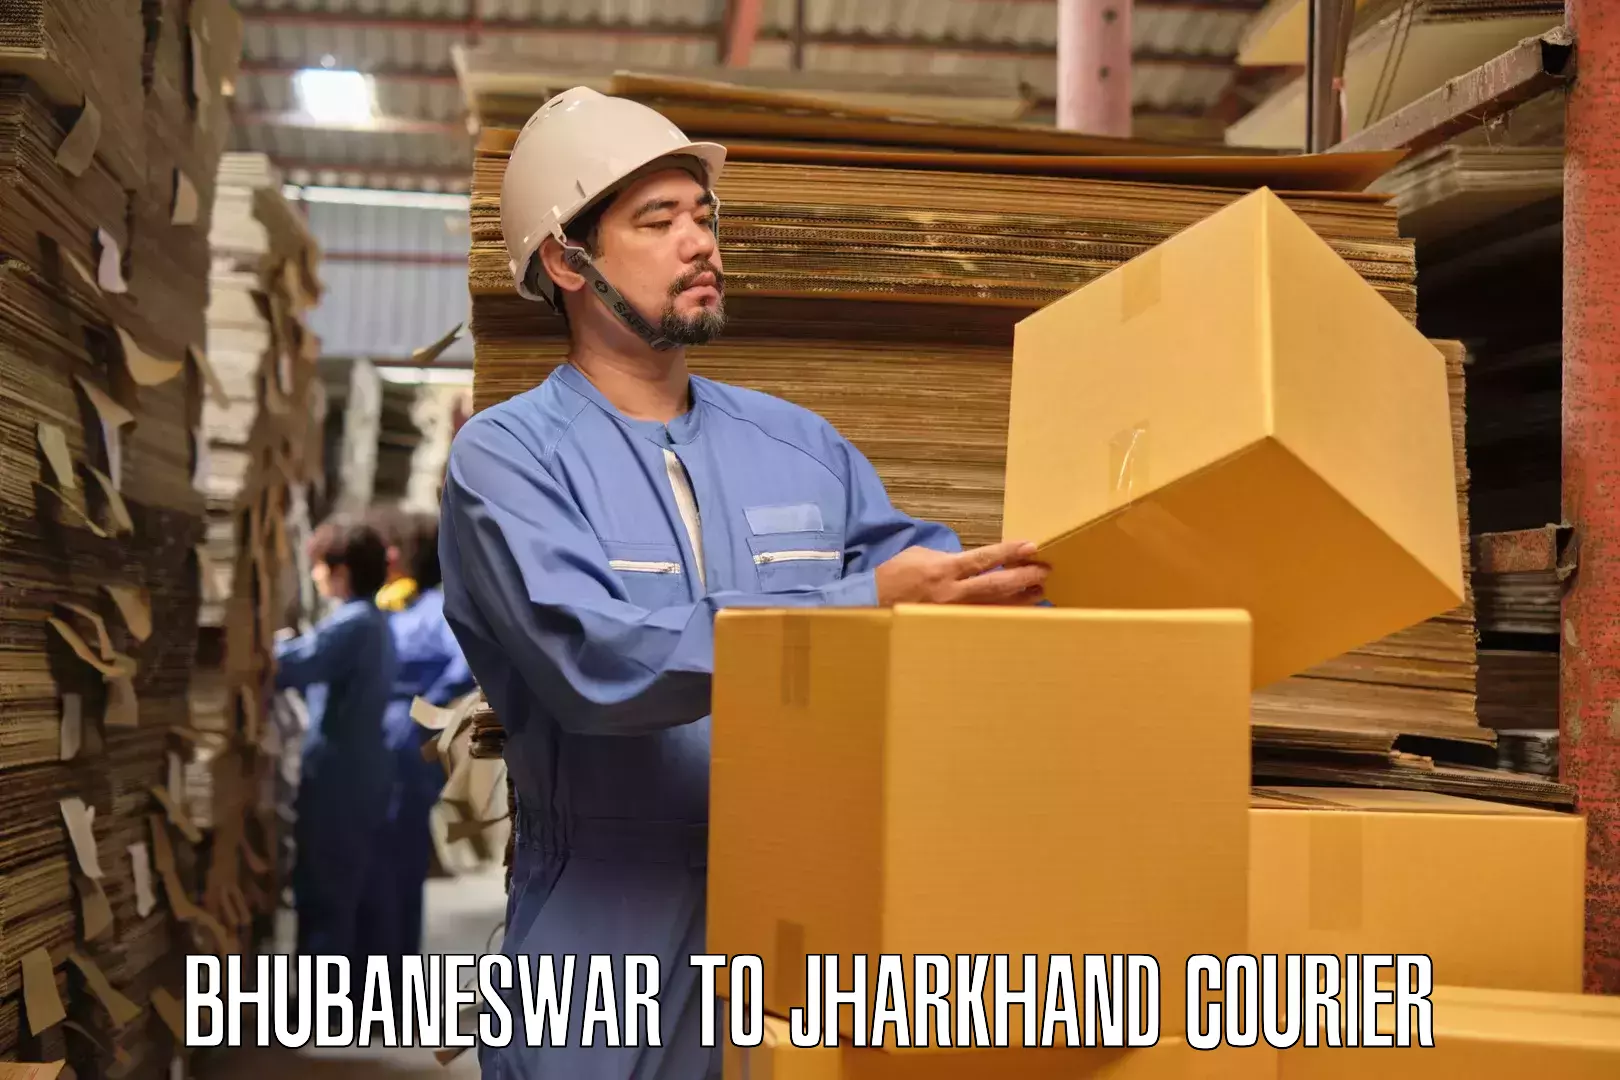 Furniture transport specialists Bhubaneswar to Jharkhand